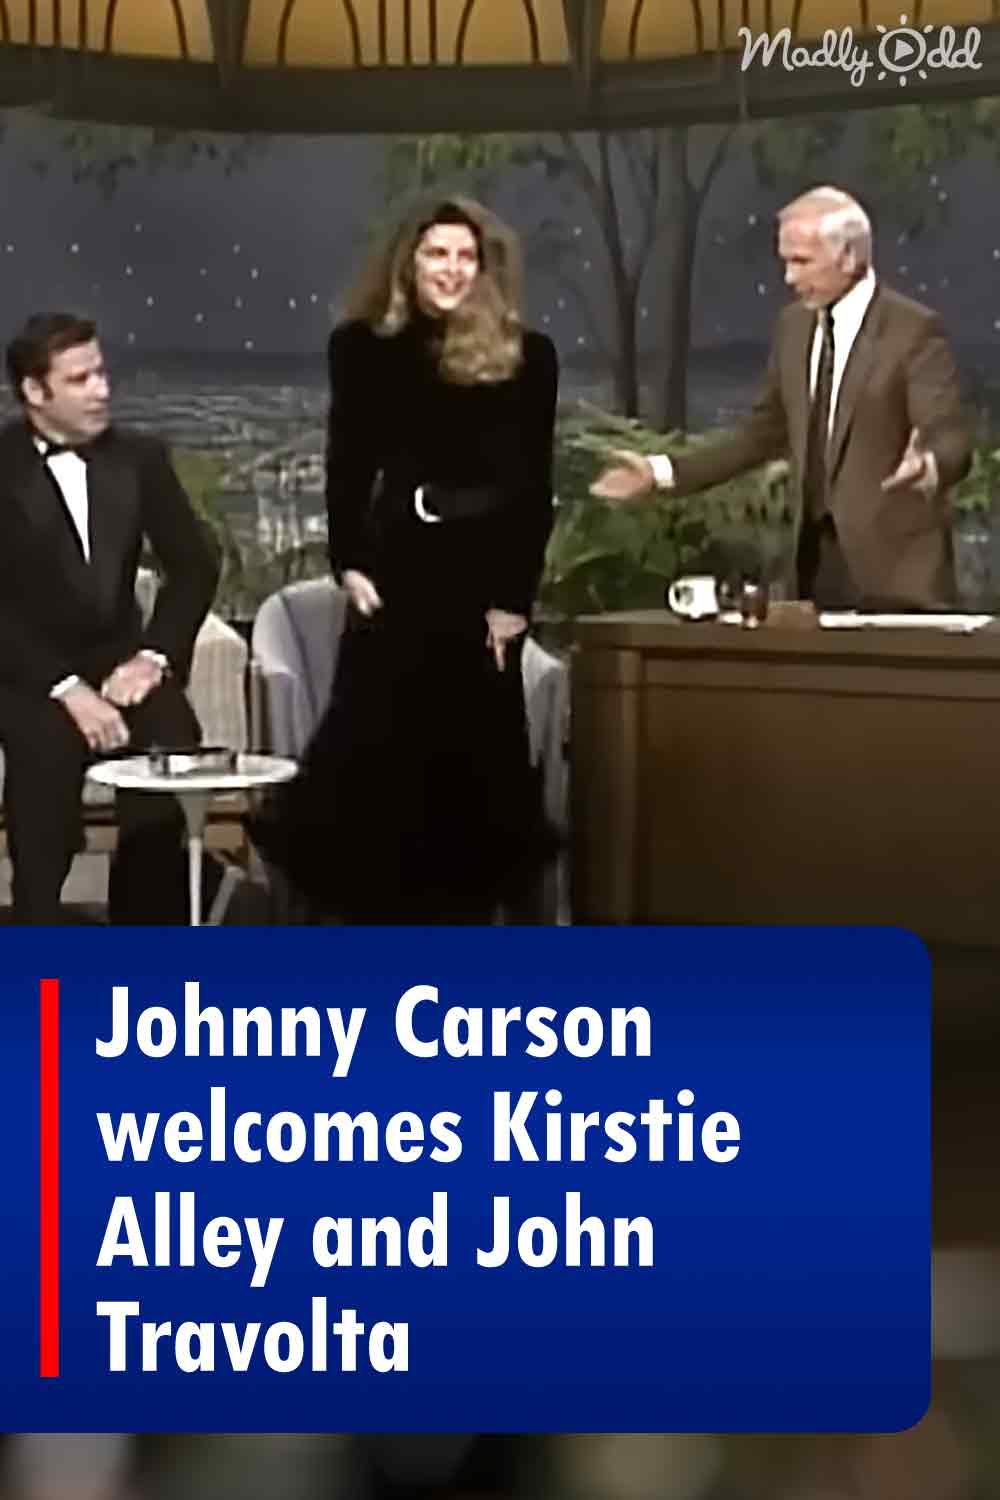 Johnny Carson welcomes Kirstie Alley and John Travolta